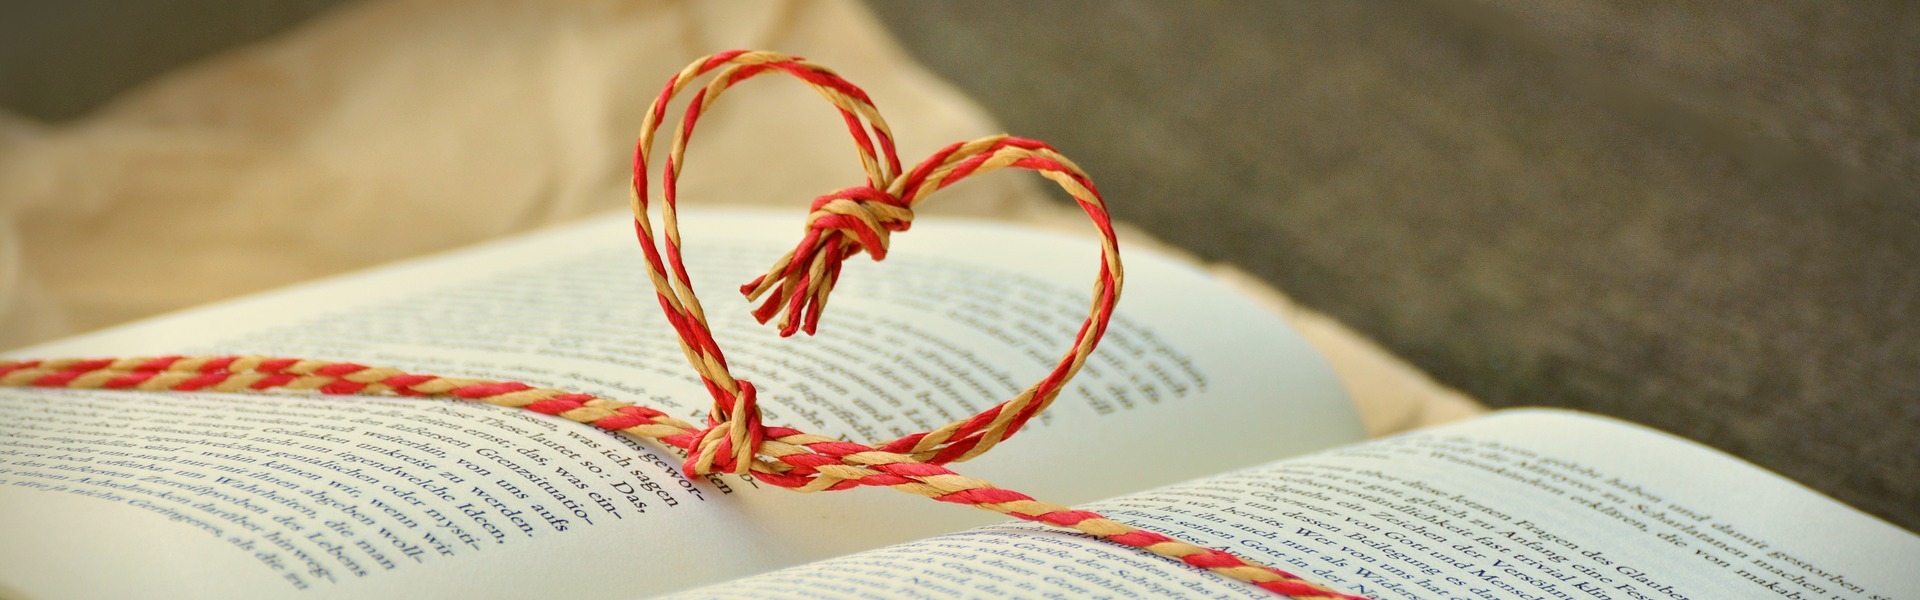 Image of a book with a red heart